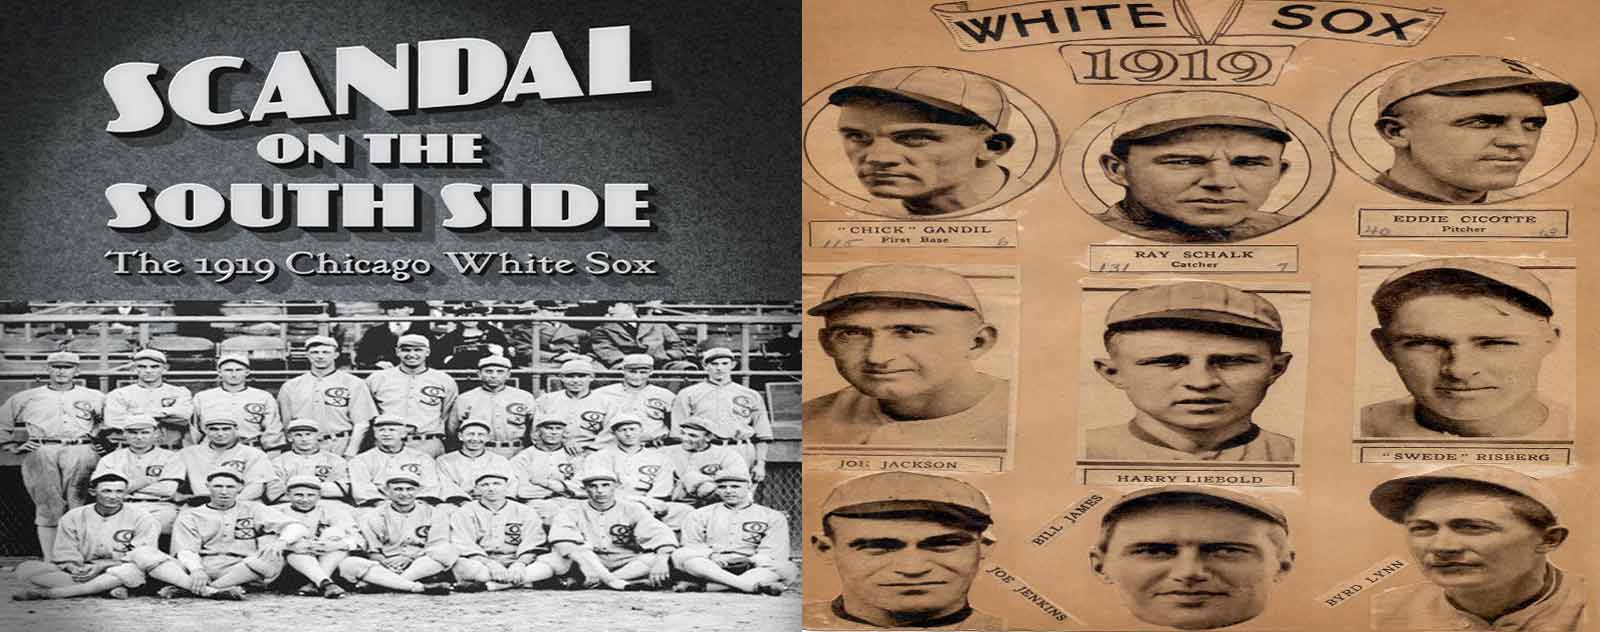 scandale white sox chicago 1919